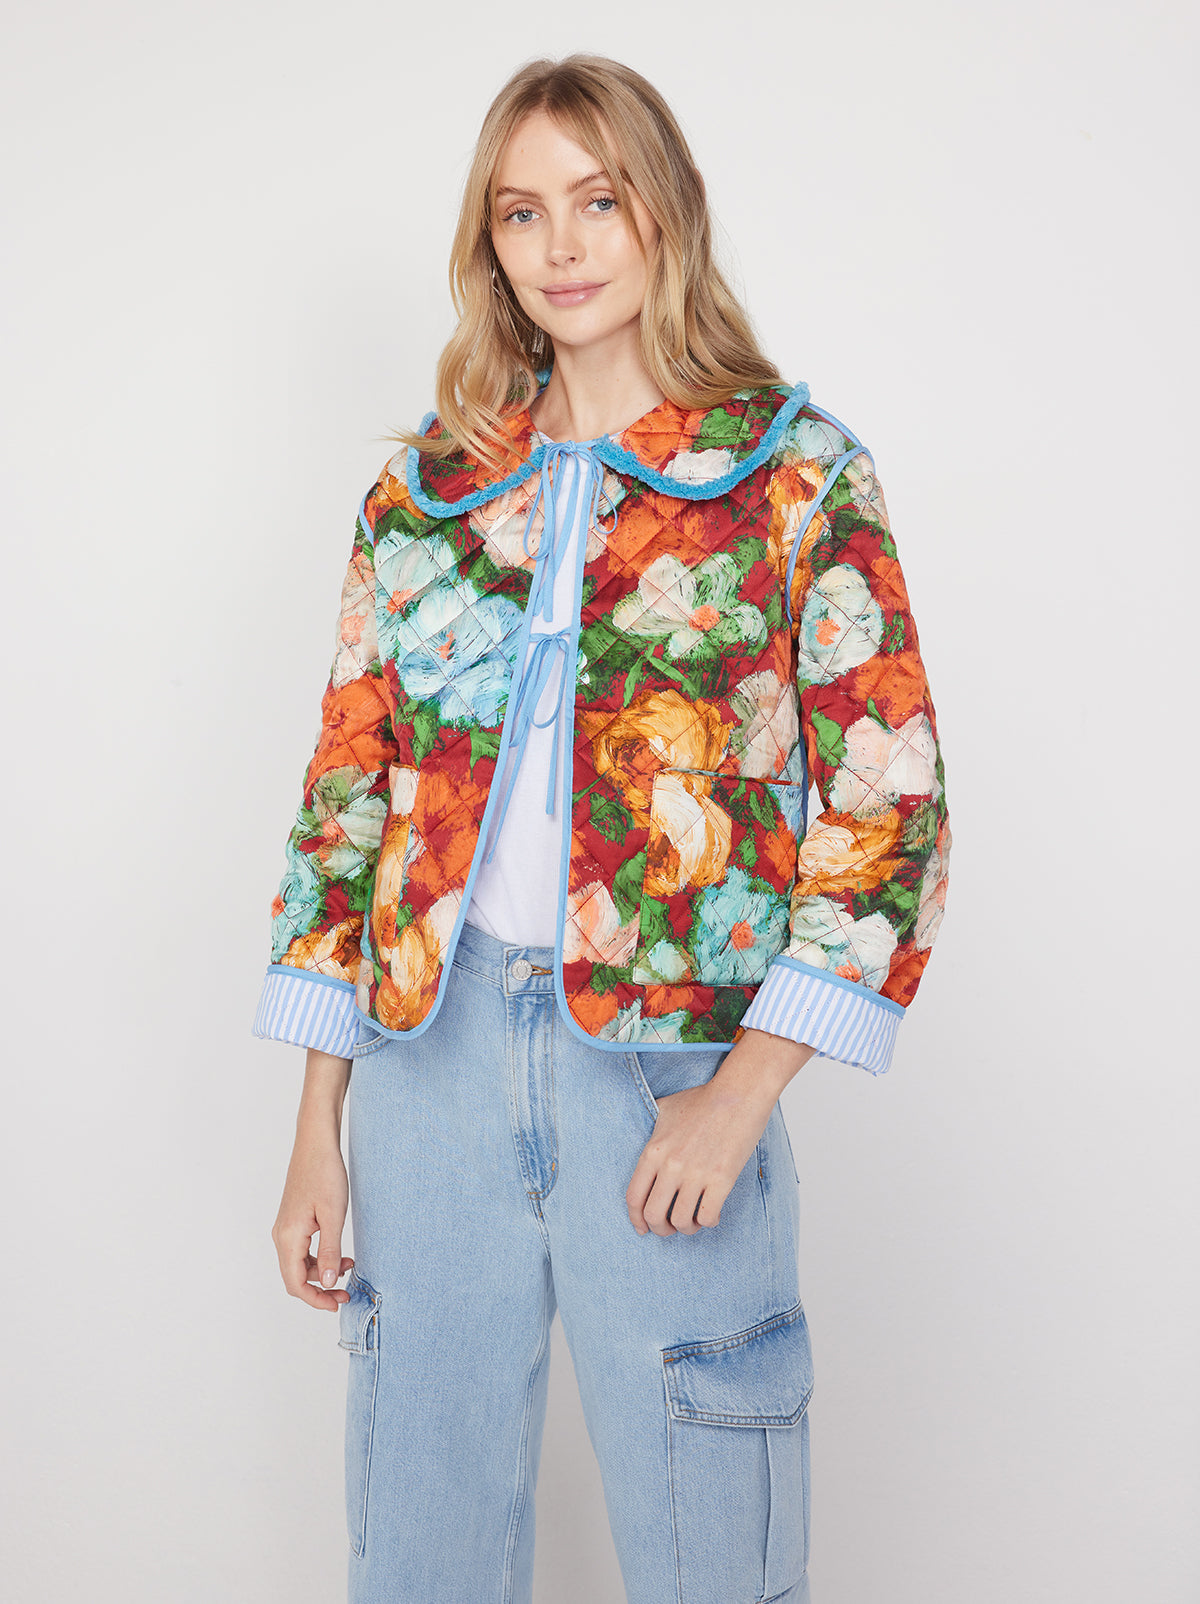 Piper Blue Impressionist Floral Print Reversible Quilted Jacket By KITRI Studio is a bestseller. This popular reversible jacket features a quilted multicoloured impressionist floral pattern on one side and baby blue pinstripes on the other - with front lace ties, large pockets and a relaxed fit. Your new favourite lightweight casual jacket